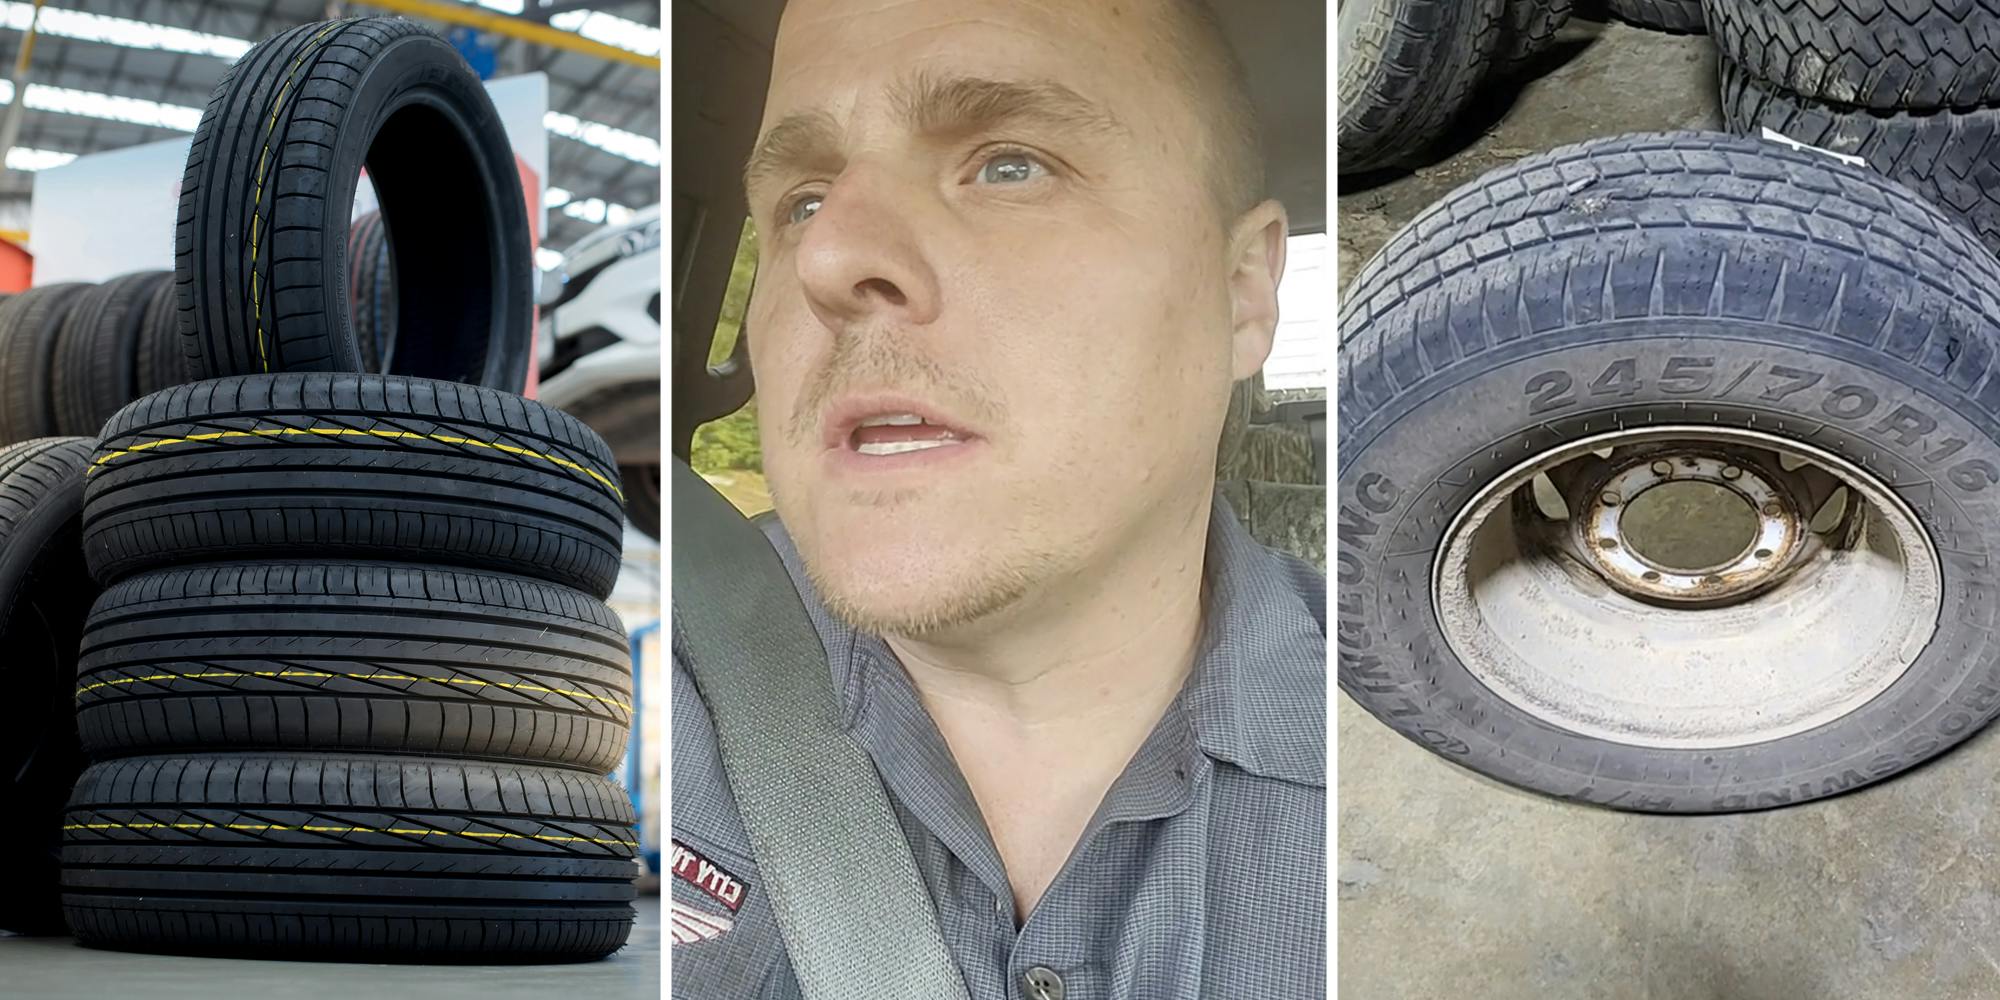 ‘He’s saying we did that on purpose’: Man gets flat right after leaving the tire shop. Now he wants a free one